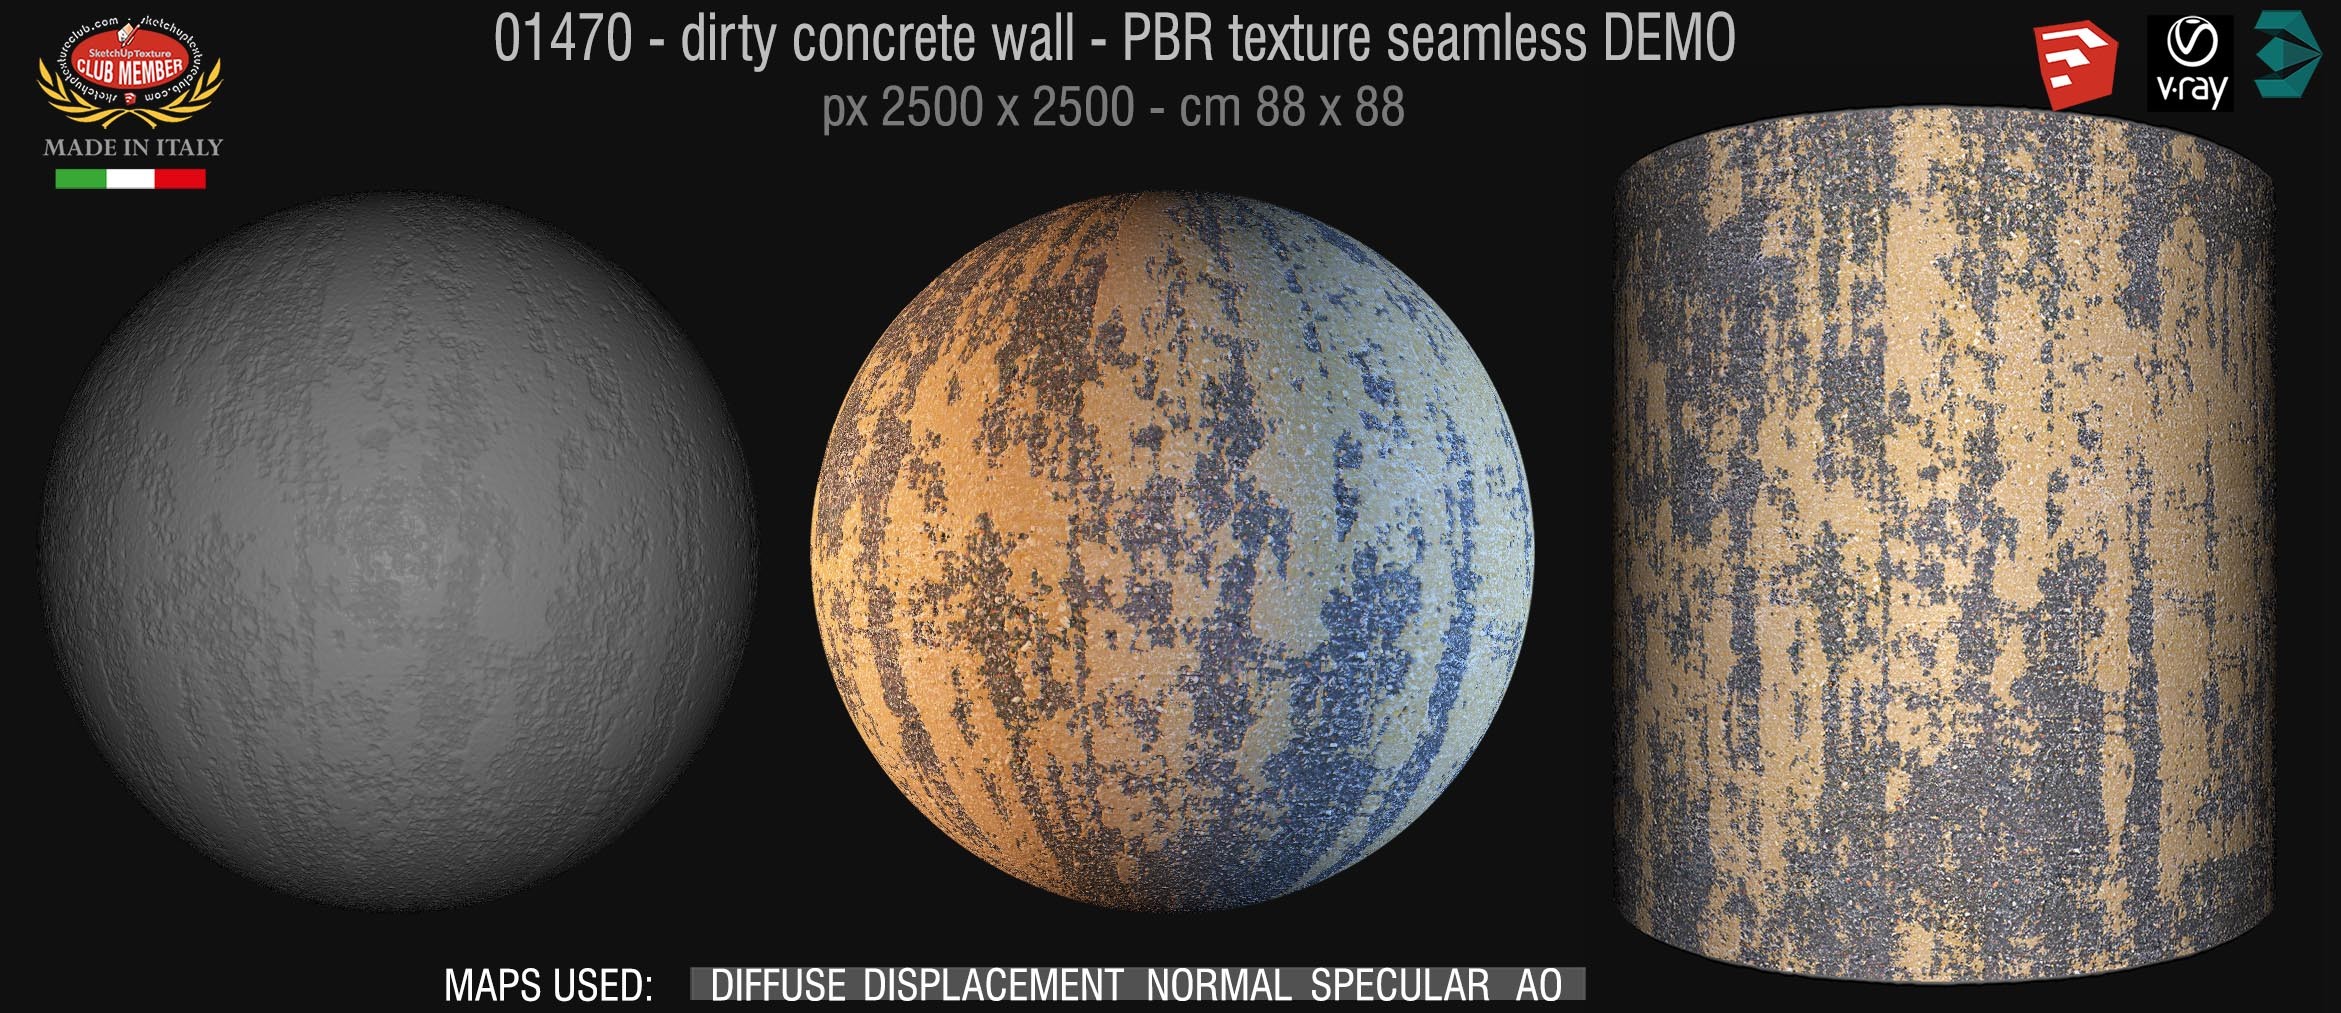 01470 Concrete bare dirty wall PBR texture seamless DEMO